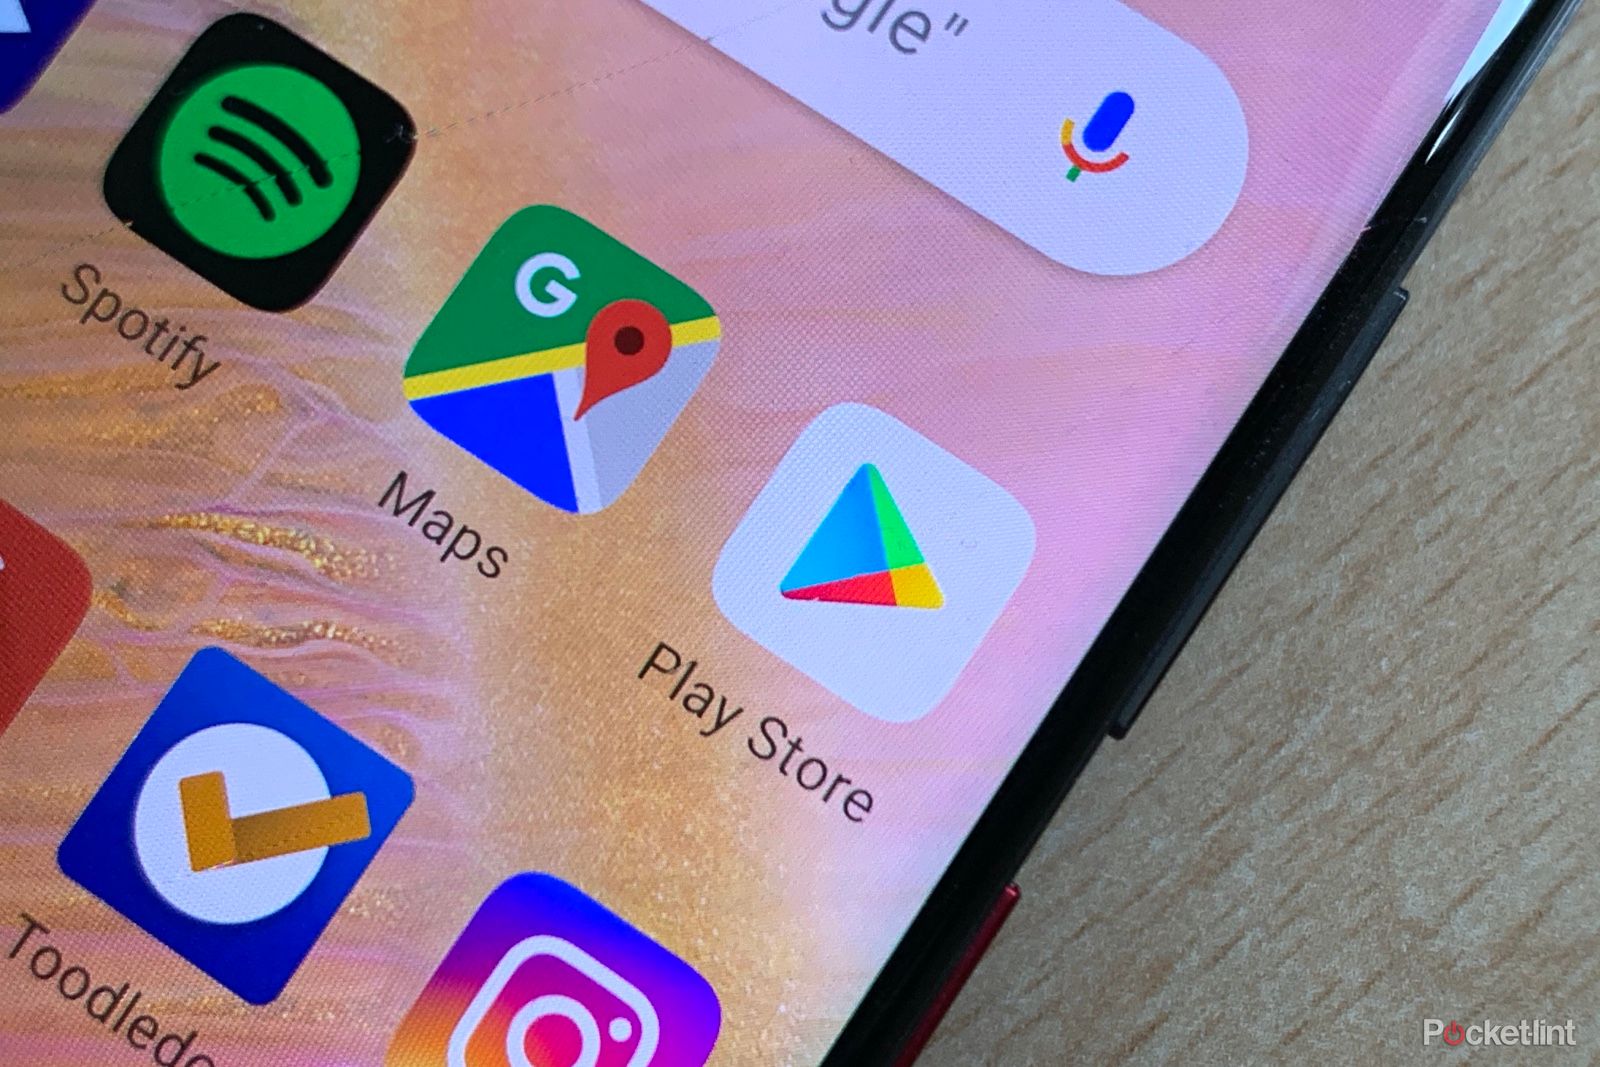 Google Play Store icon on a phone screen